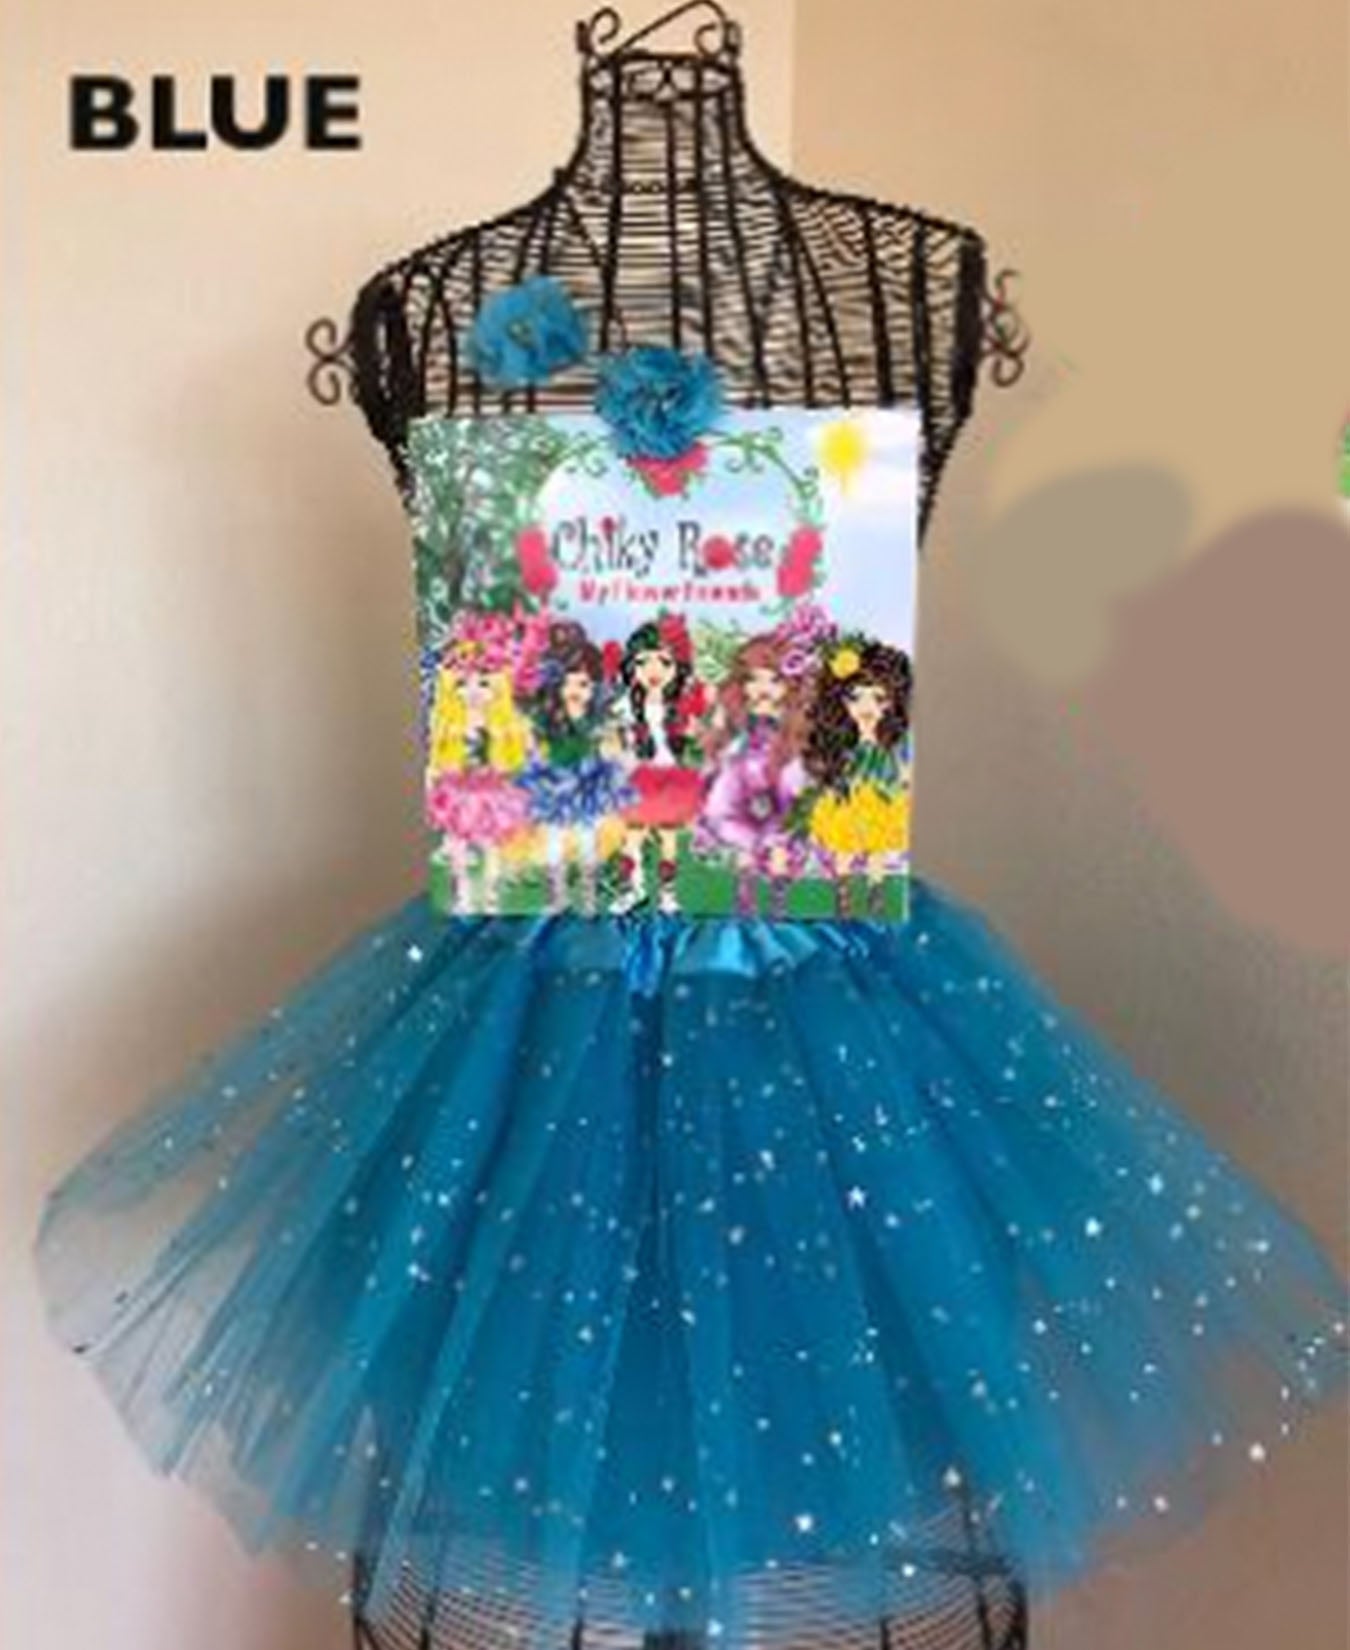 Z Chiky Rose Tutus, Books, Hair Flowers and Stickers